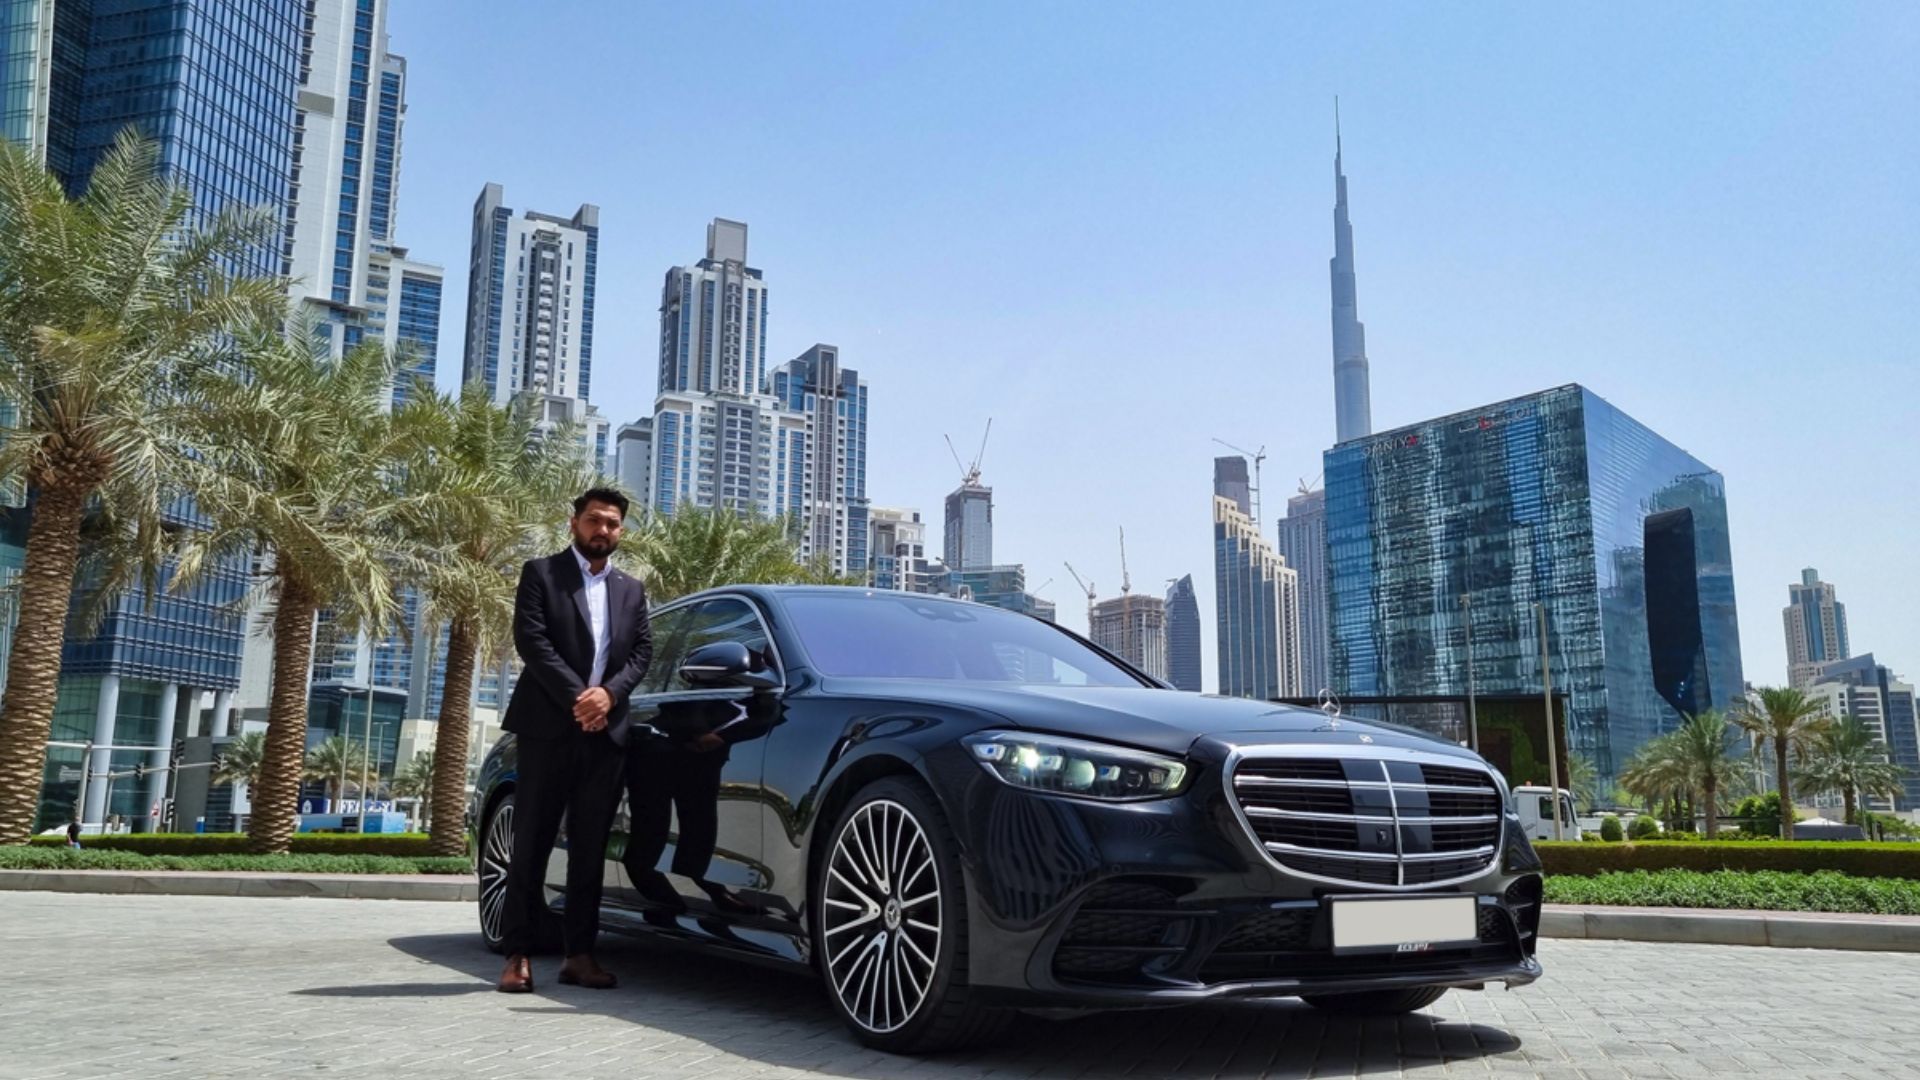 What Are the Benefits of Monthly Car Rentals in Dubai